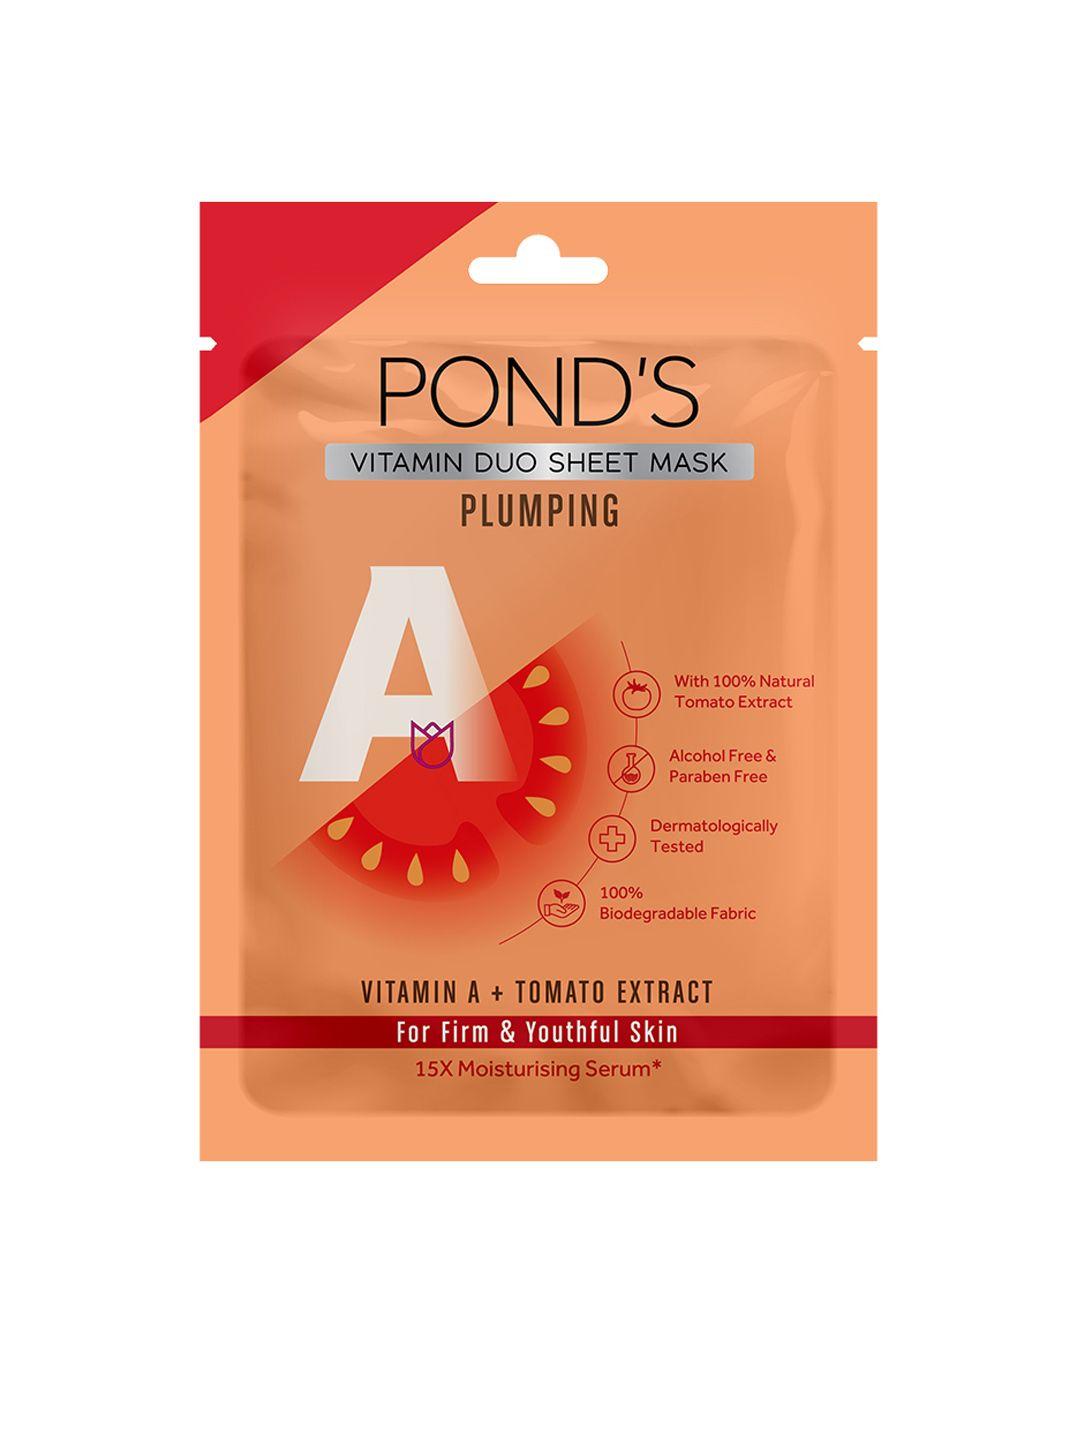 ponds-plumping-firm-youthful-vitamin-duo-skin-natural-tomato-&-vitamin-a-sheet-mask-25-ml